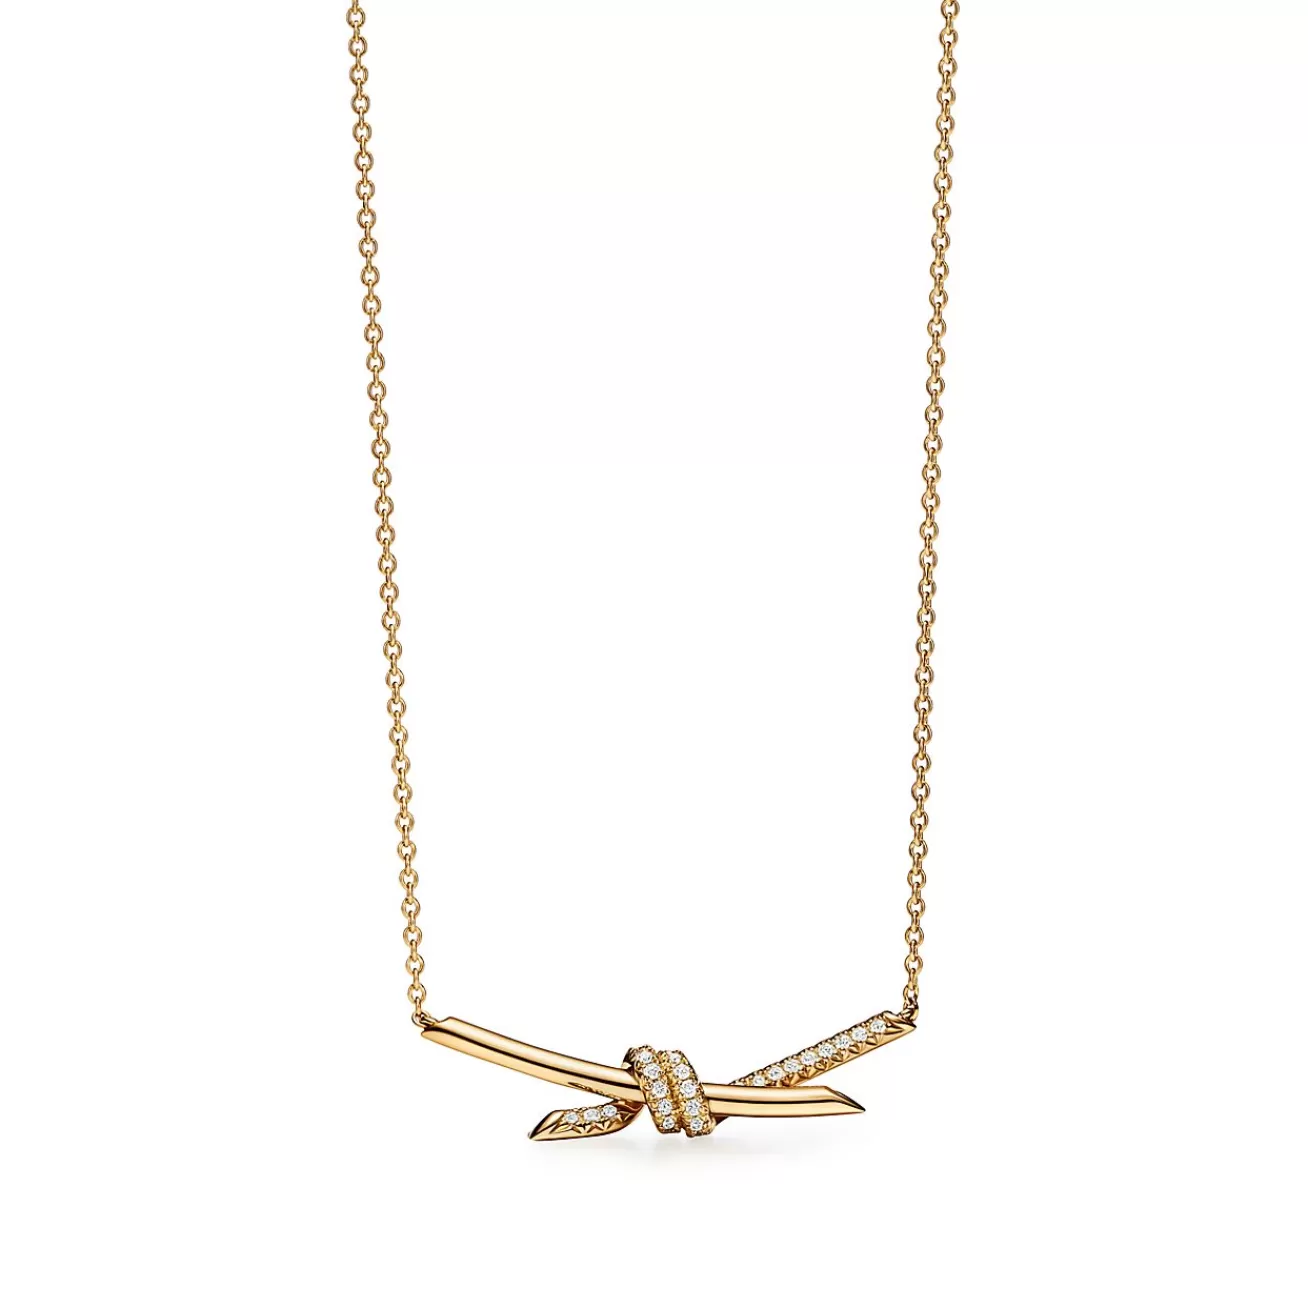 Tiffany & Co. Tiffany Knot Pendant in Yellow Gold with Diamonds | ^ Necklaces & Pendants | Gifts for Her